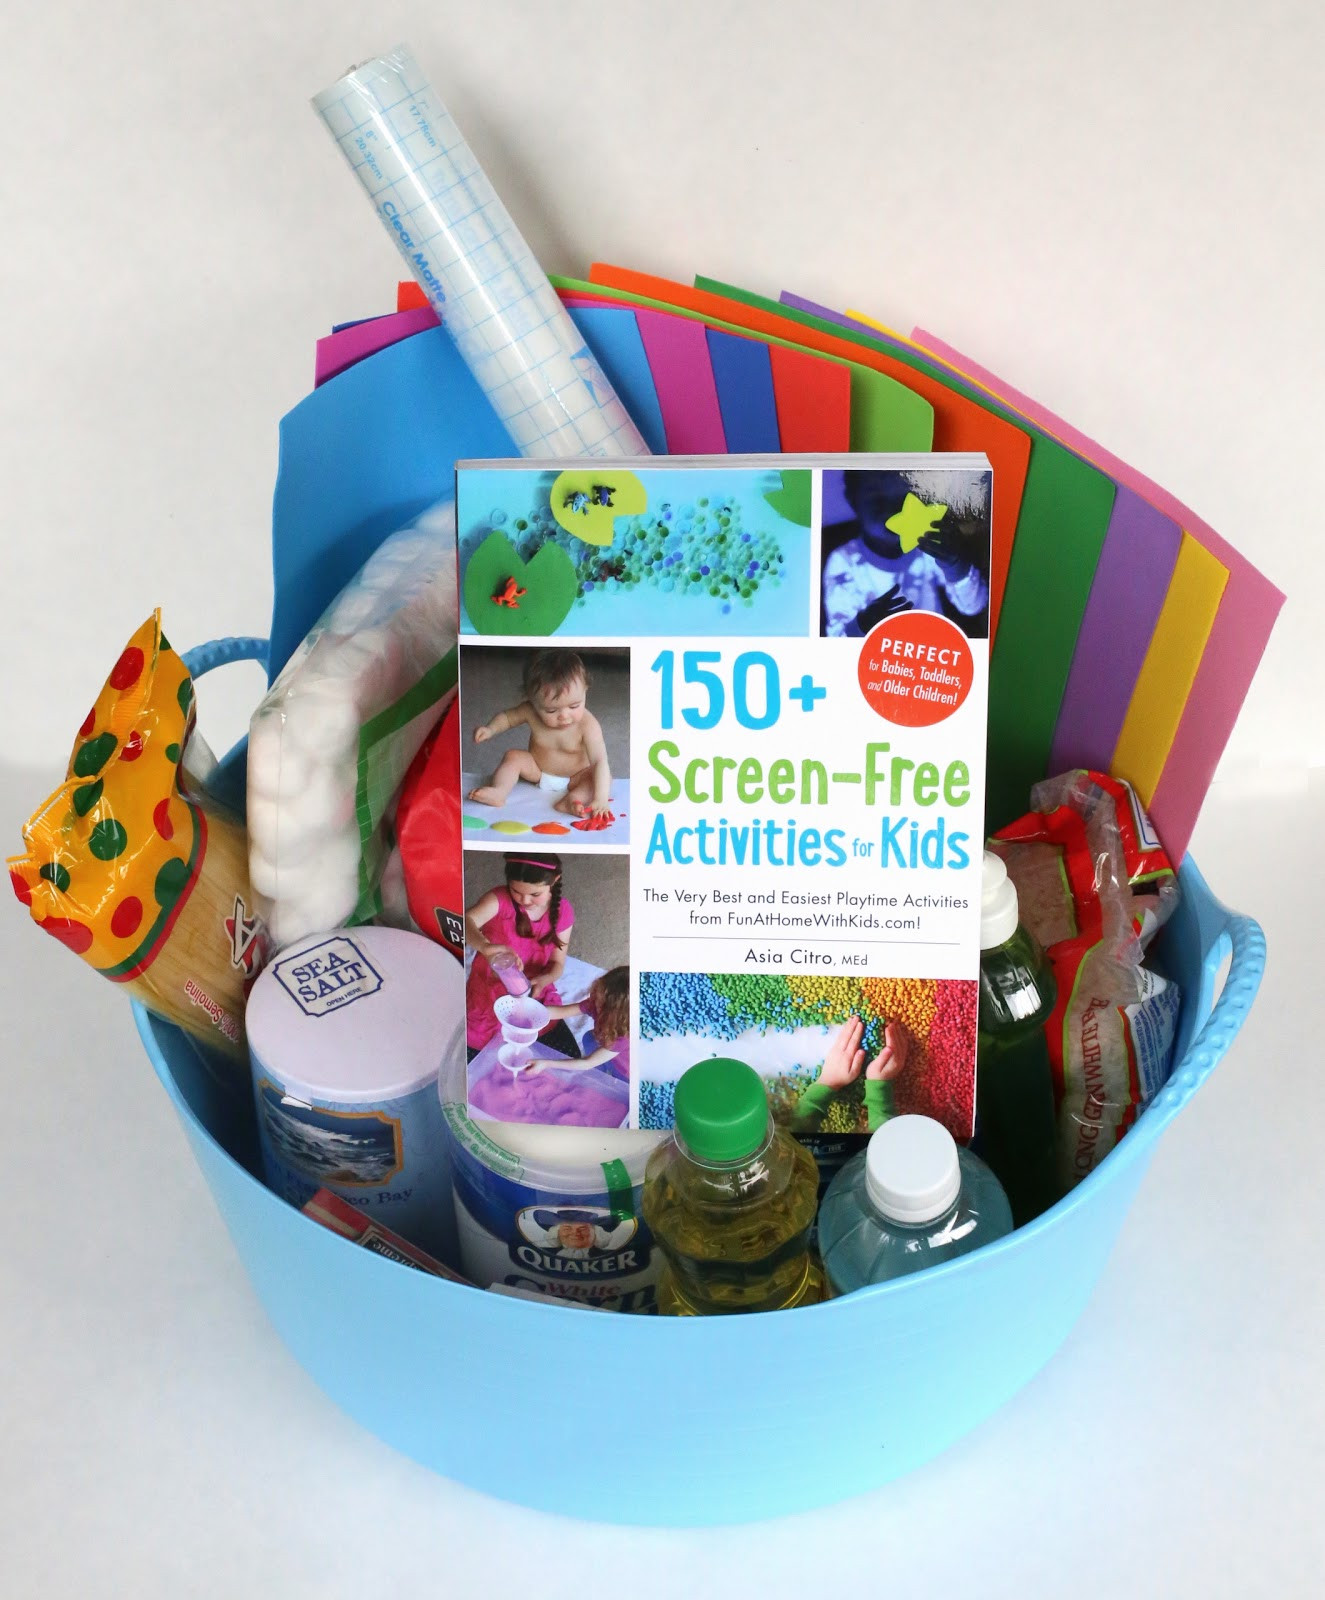 Affordable Gifts For Kids
 DIY Sensory Kits Creative Gifts for Kids